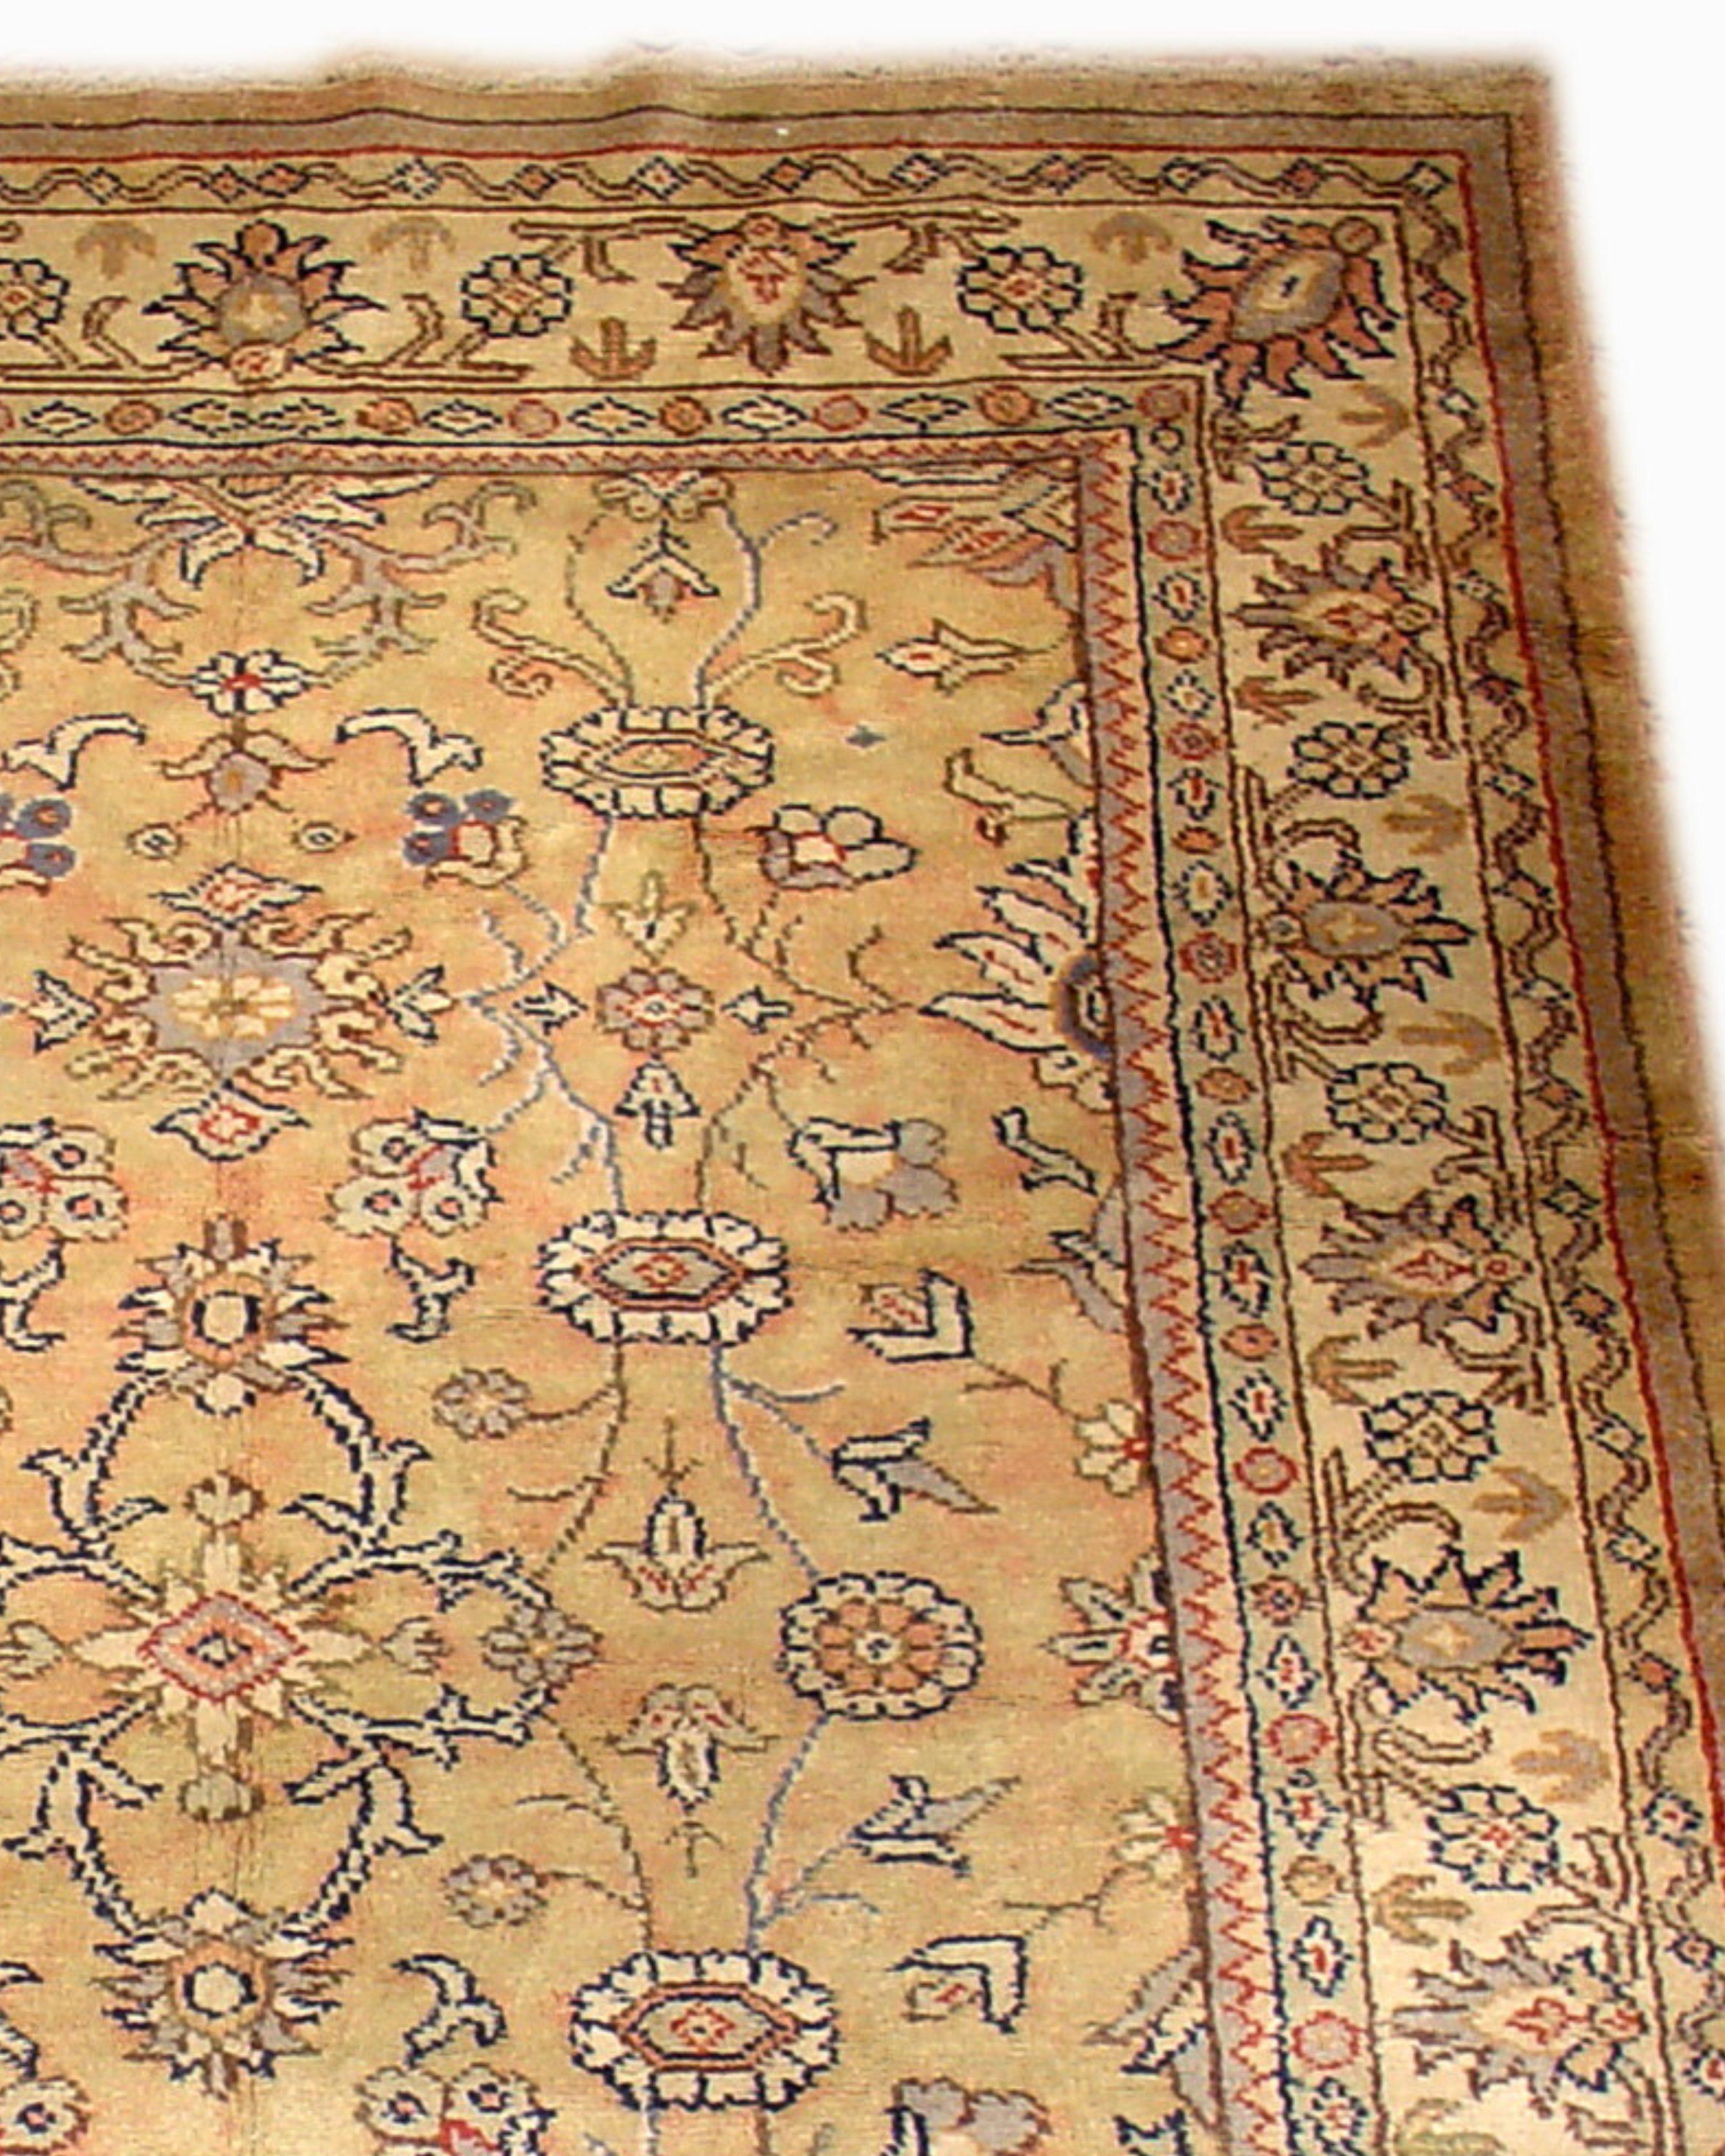 Antique Turkish Anatolian Oushak Rug, Early 20th Century

Additional Information:
Dimensions: 8'0